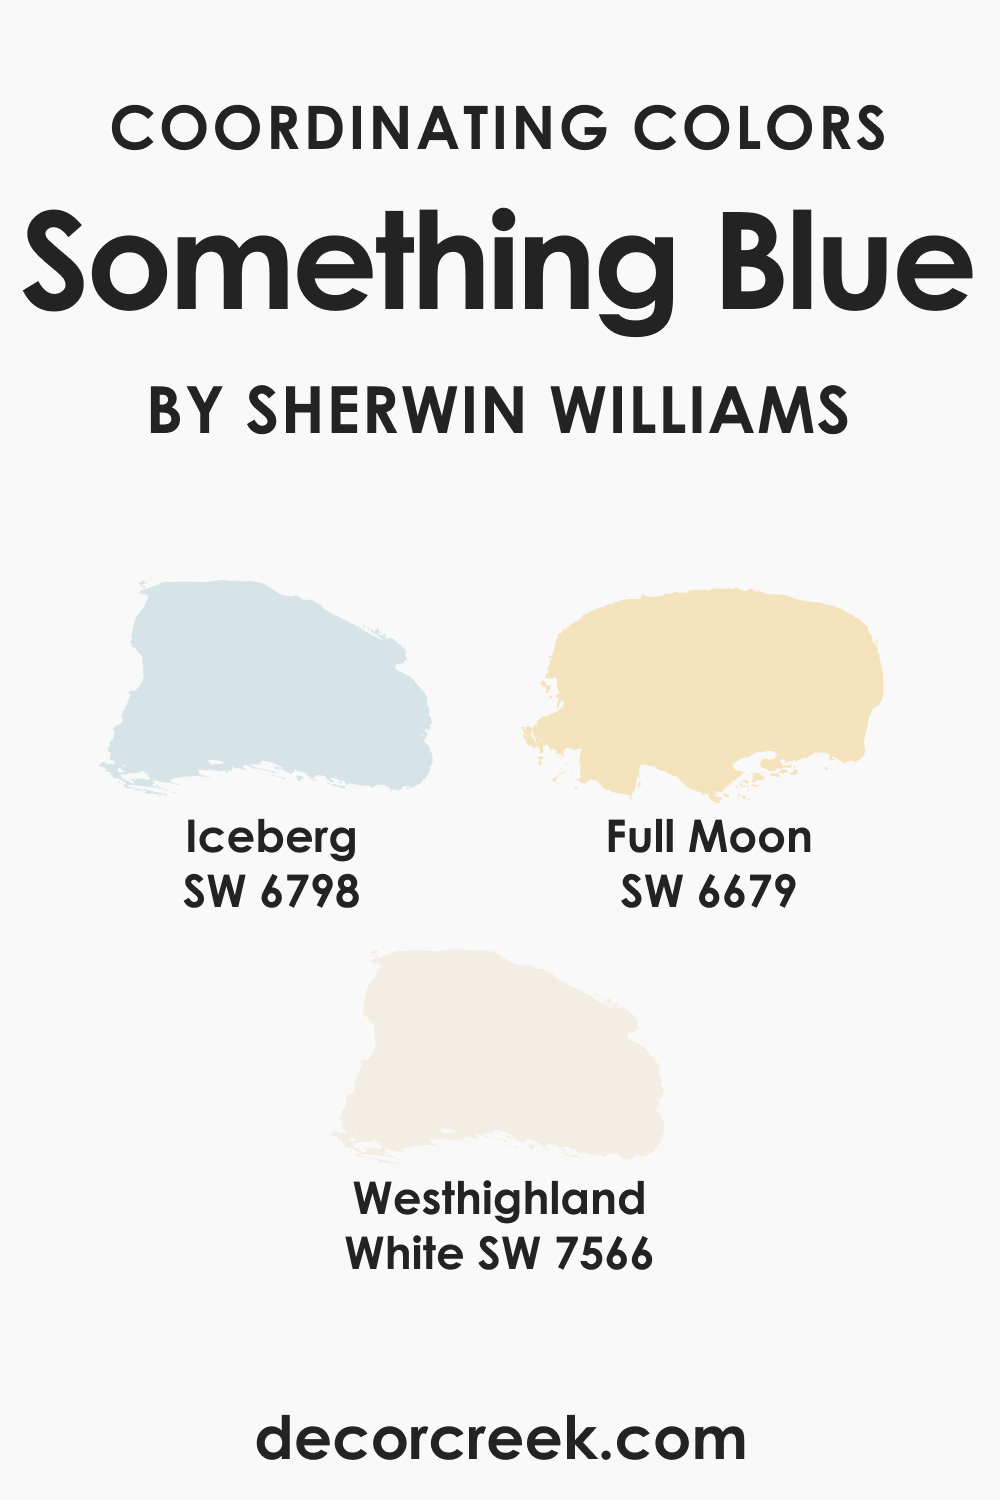 Coordinating Colors of SW 6800 Something Blue